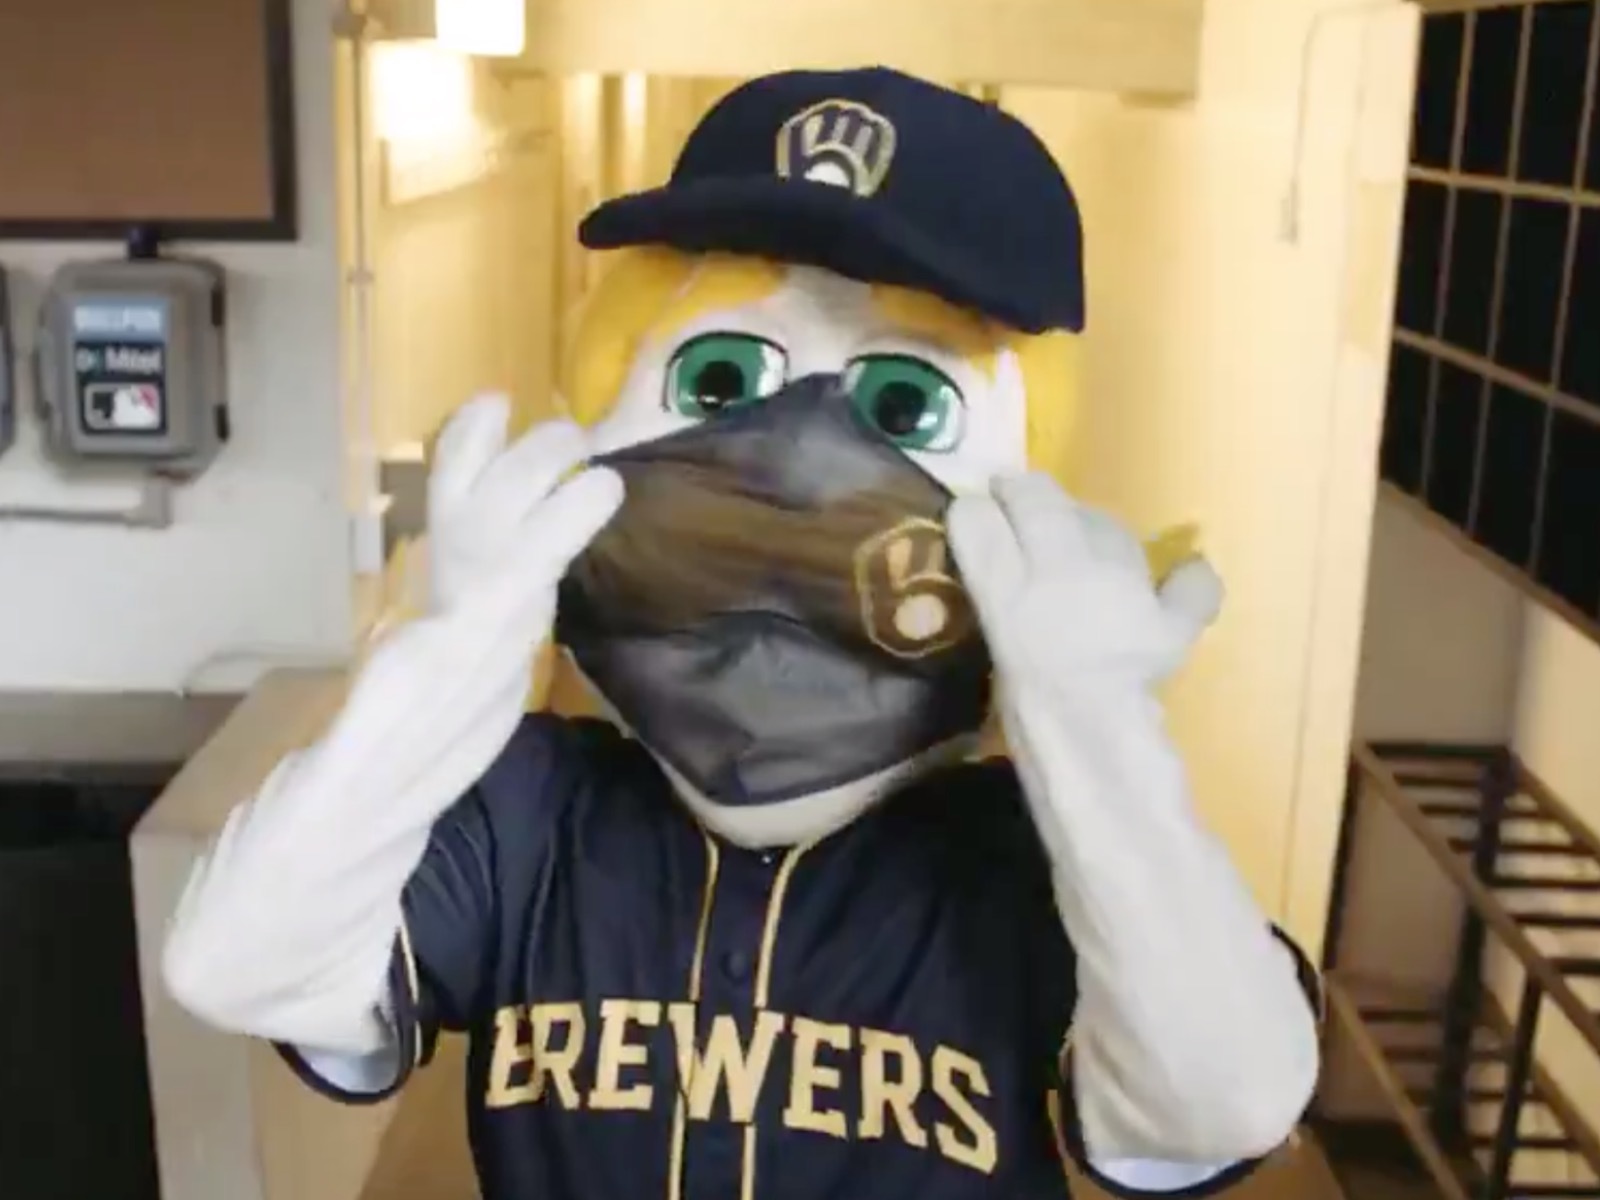 Here's the result of the Brewers' Mascot Makeover: a new Bernie's Chalet